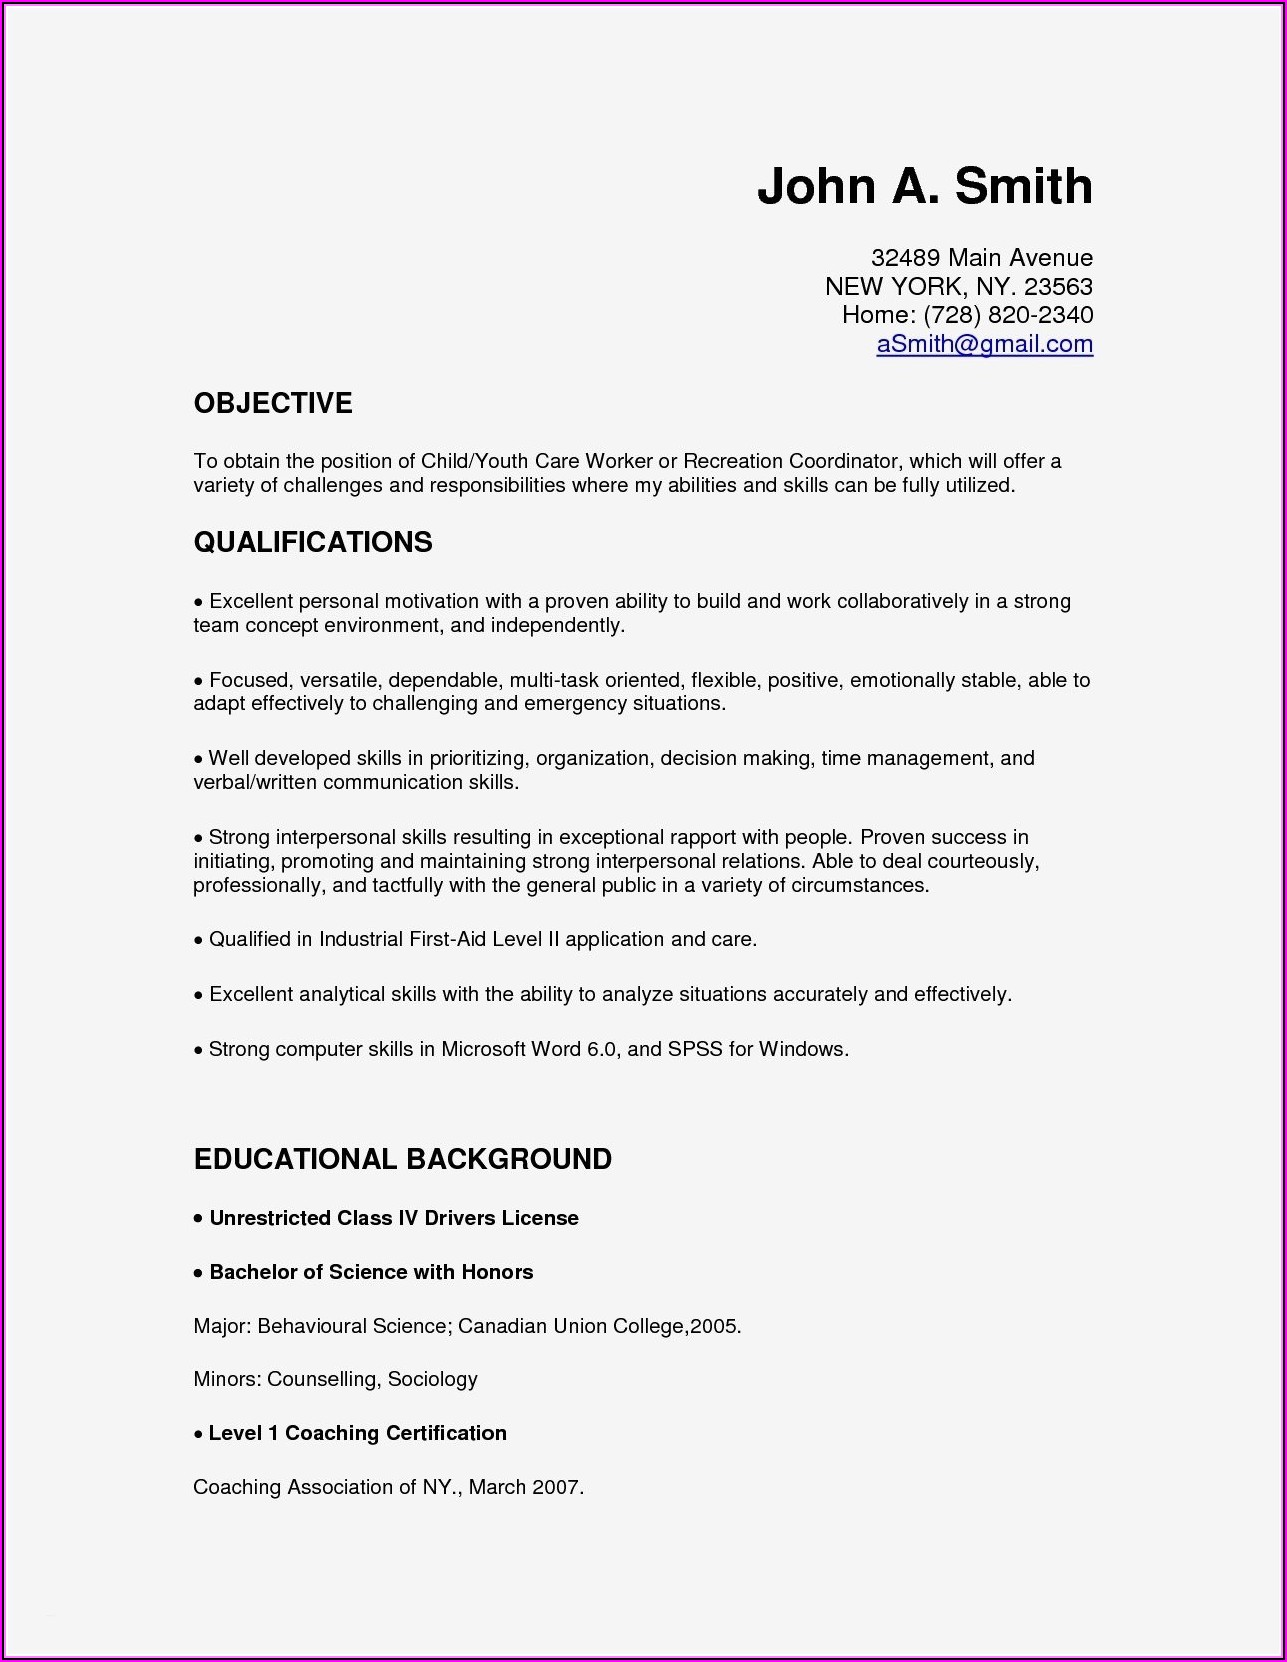 Resume Format For It Professional Download